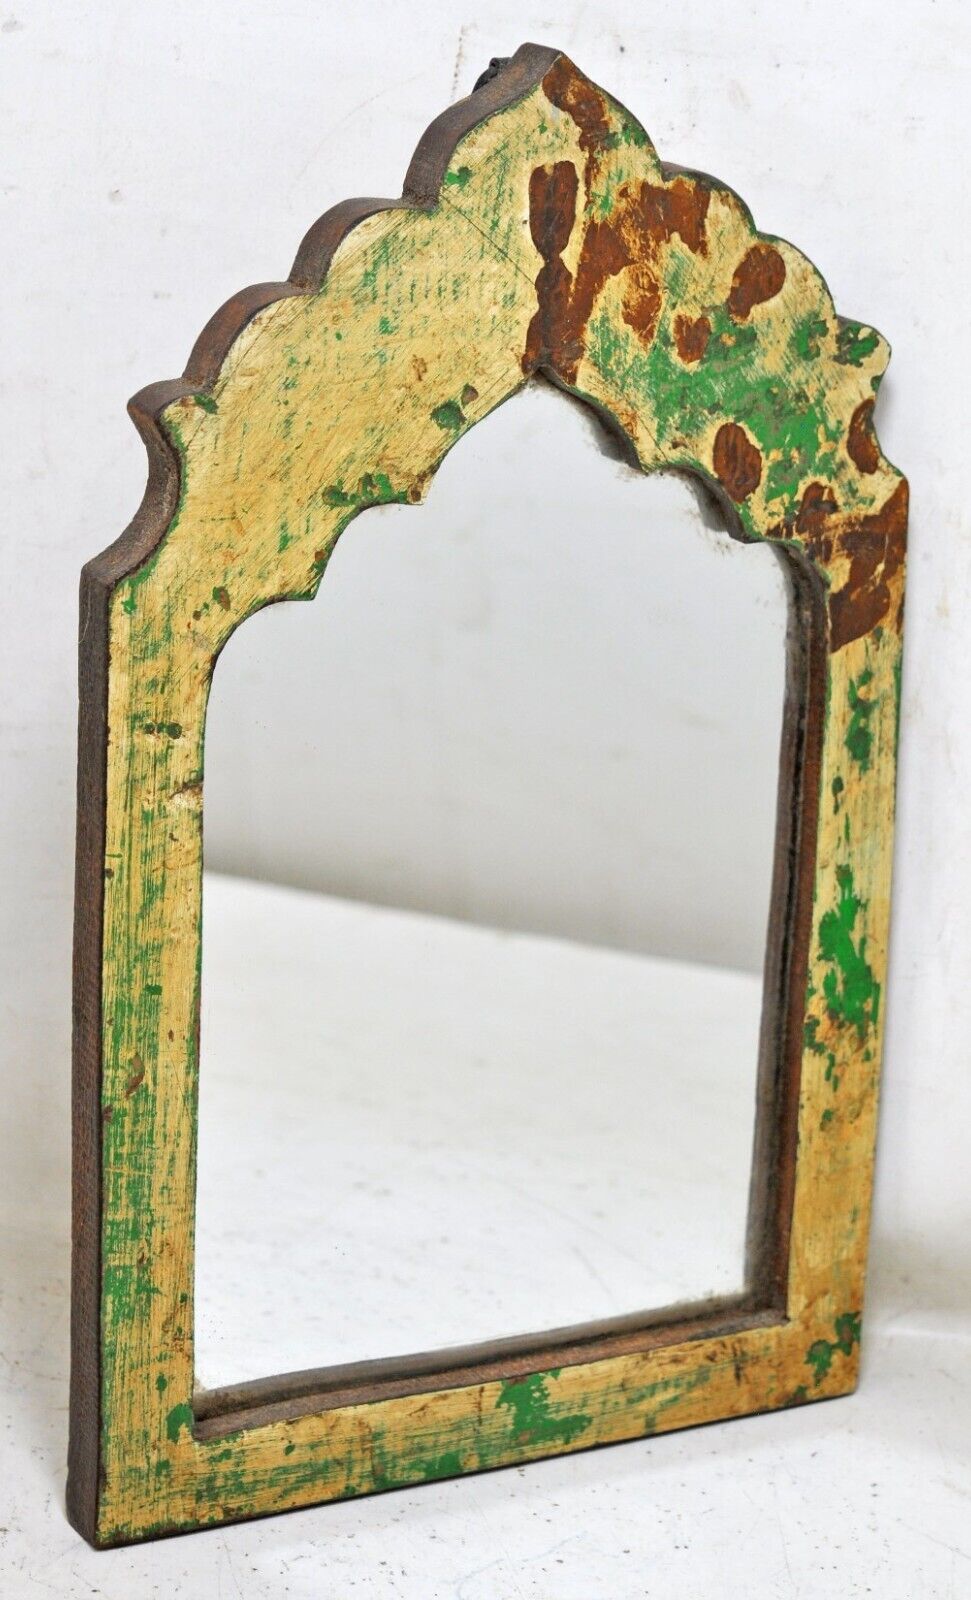 Salvage Reclaimed Wood Wall Décor Arch Shaped Mirror Frame Rustic Polychrome